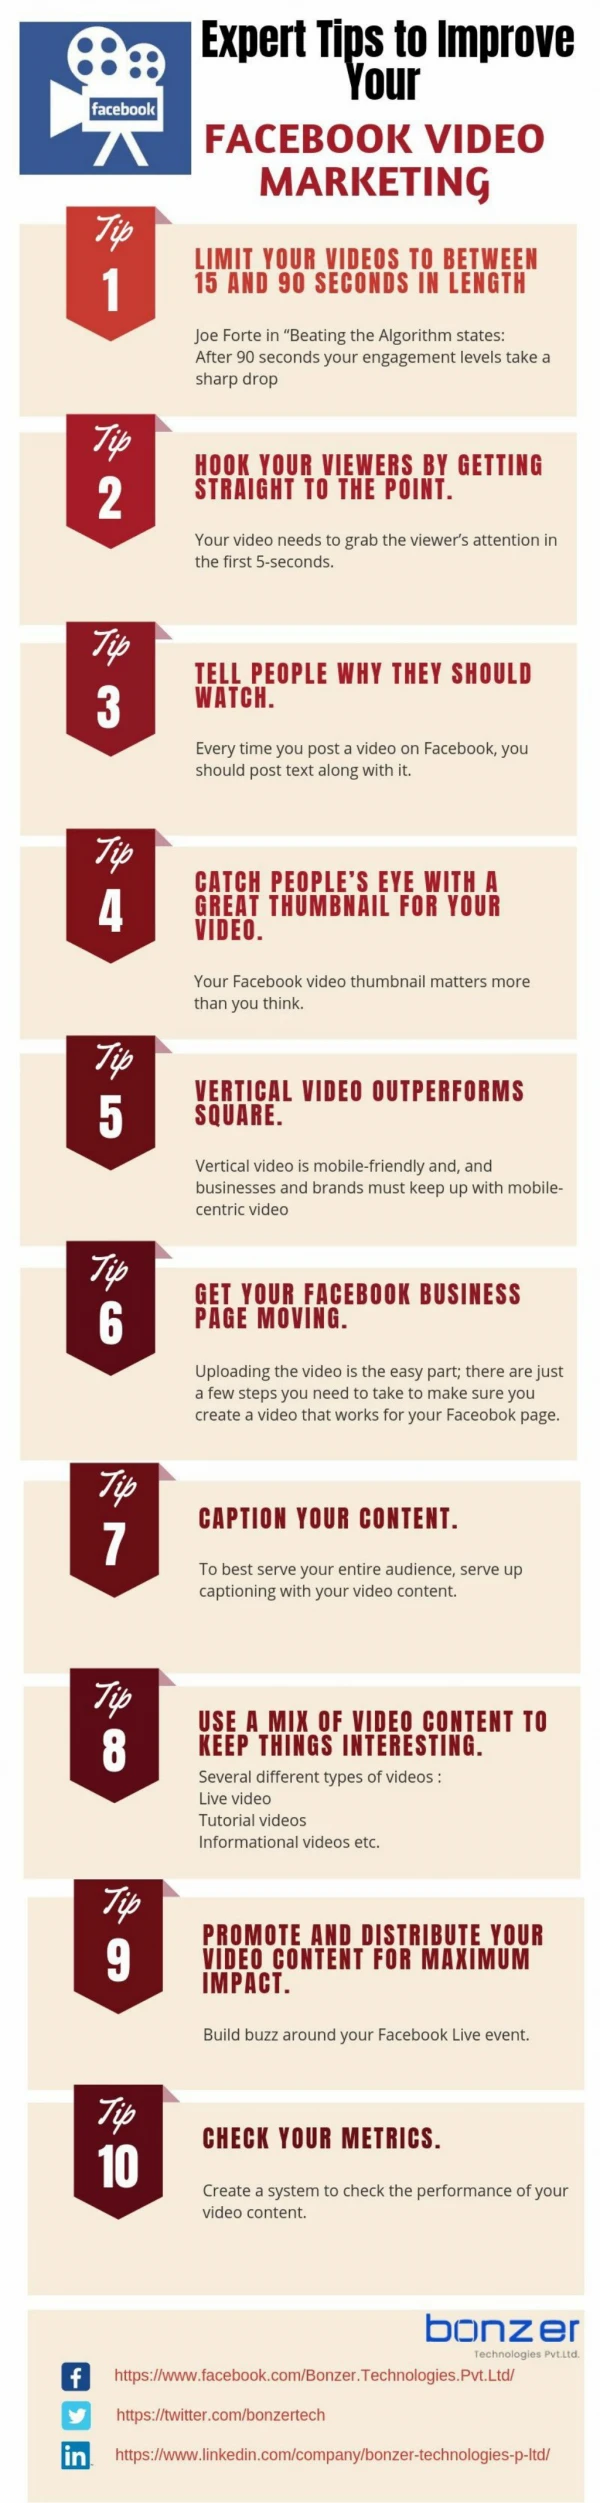 Expert Tips to Improve Your Facebook Video Marketing